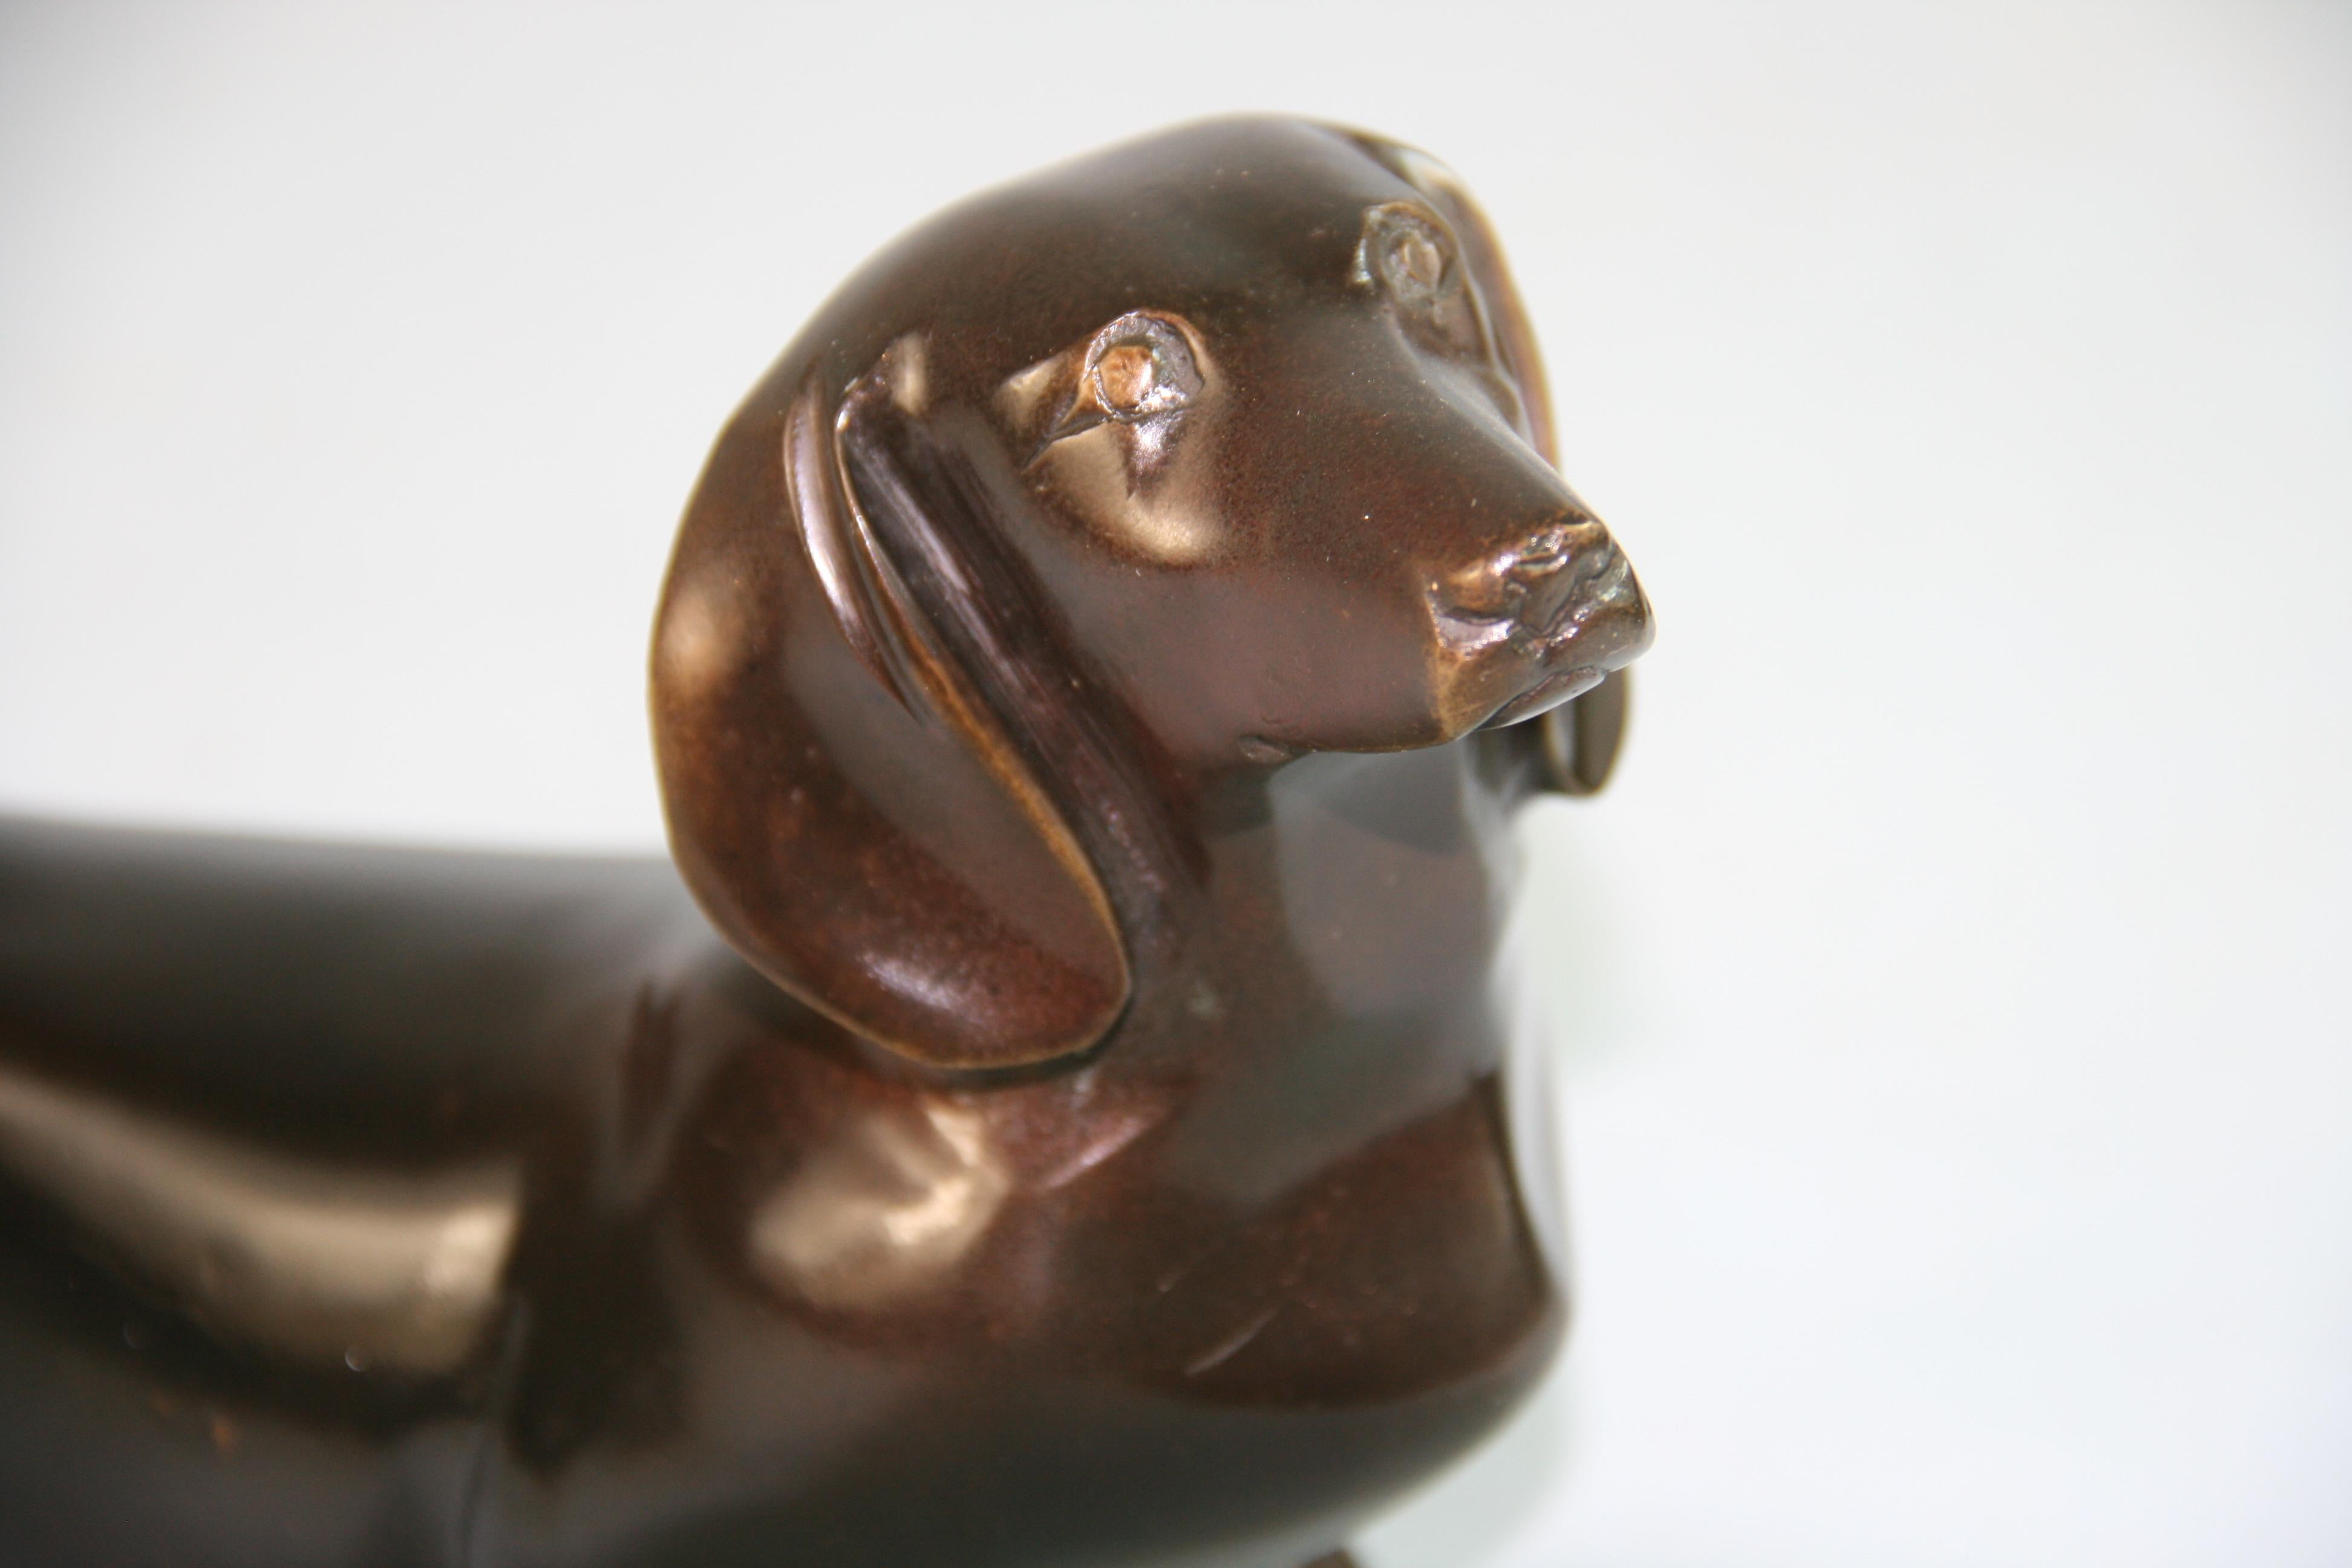 Hand-Crafted Japanese Cast bronze sculpture of a Dachshund Dog